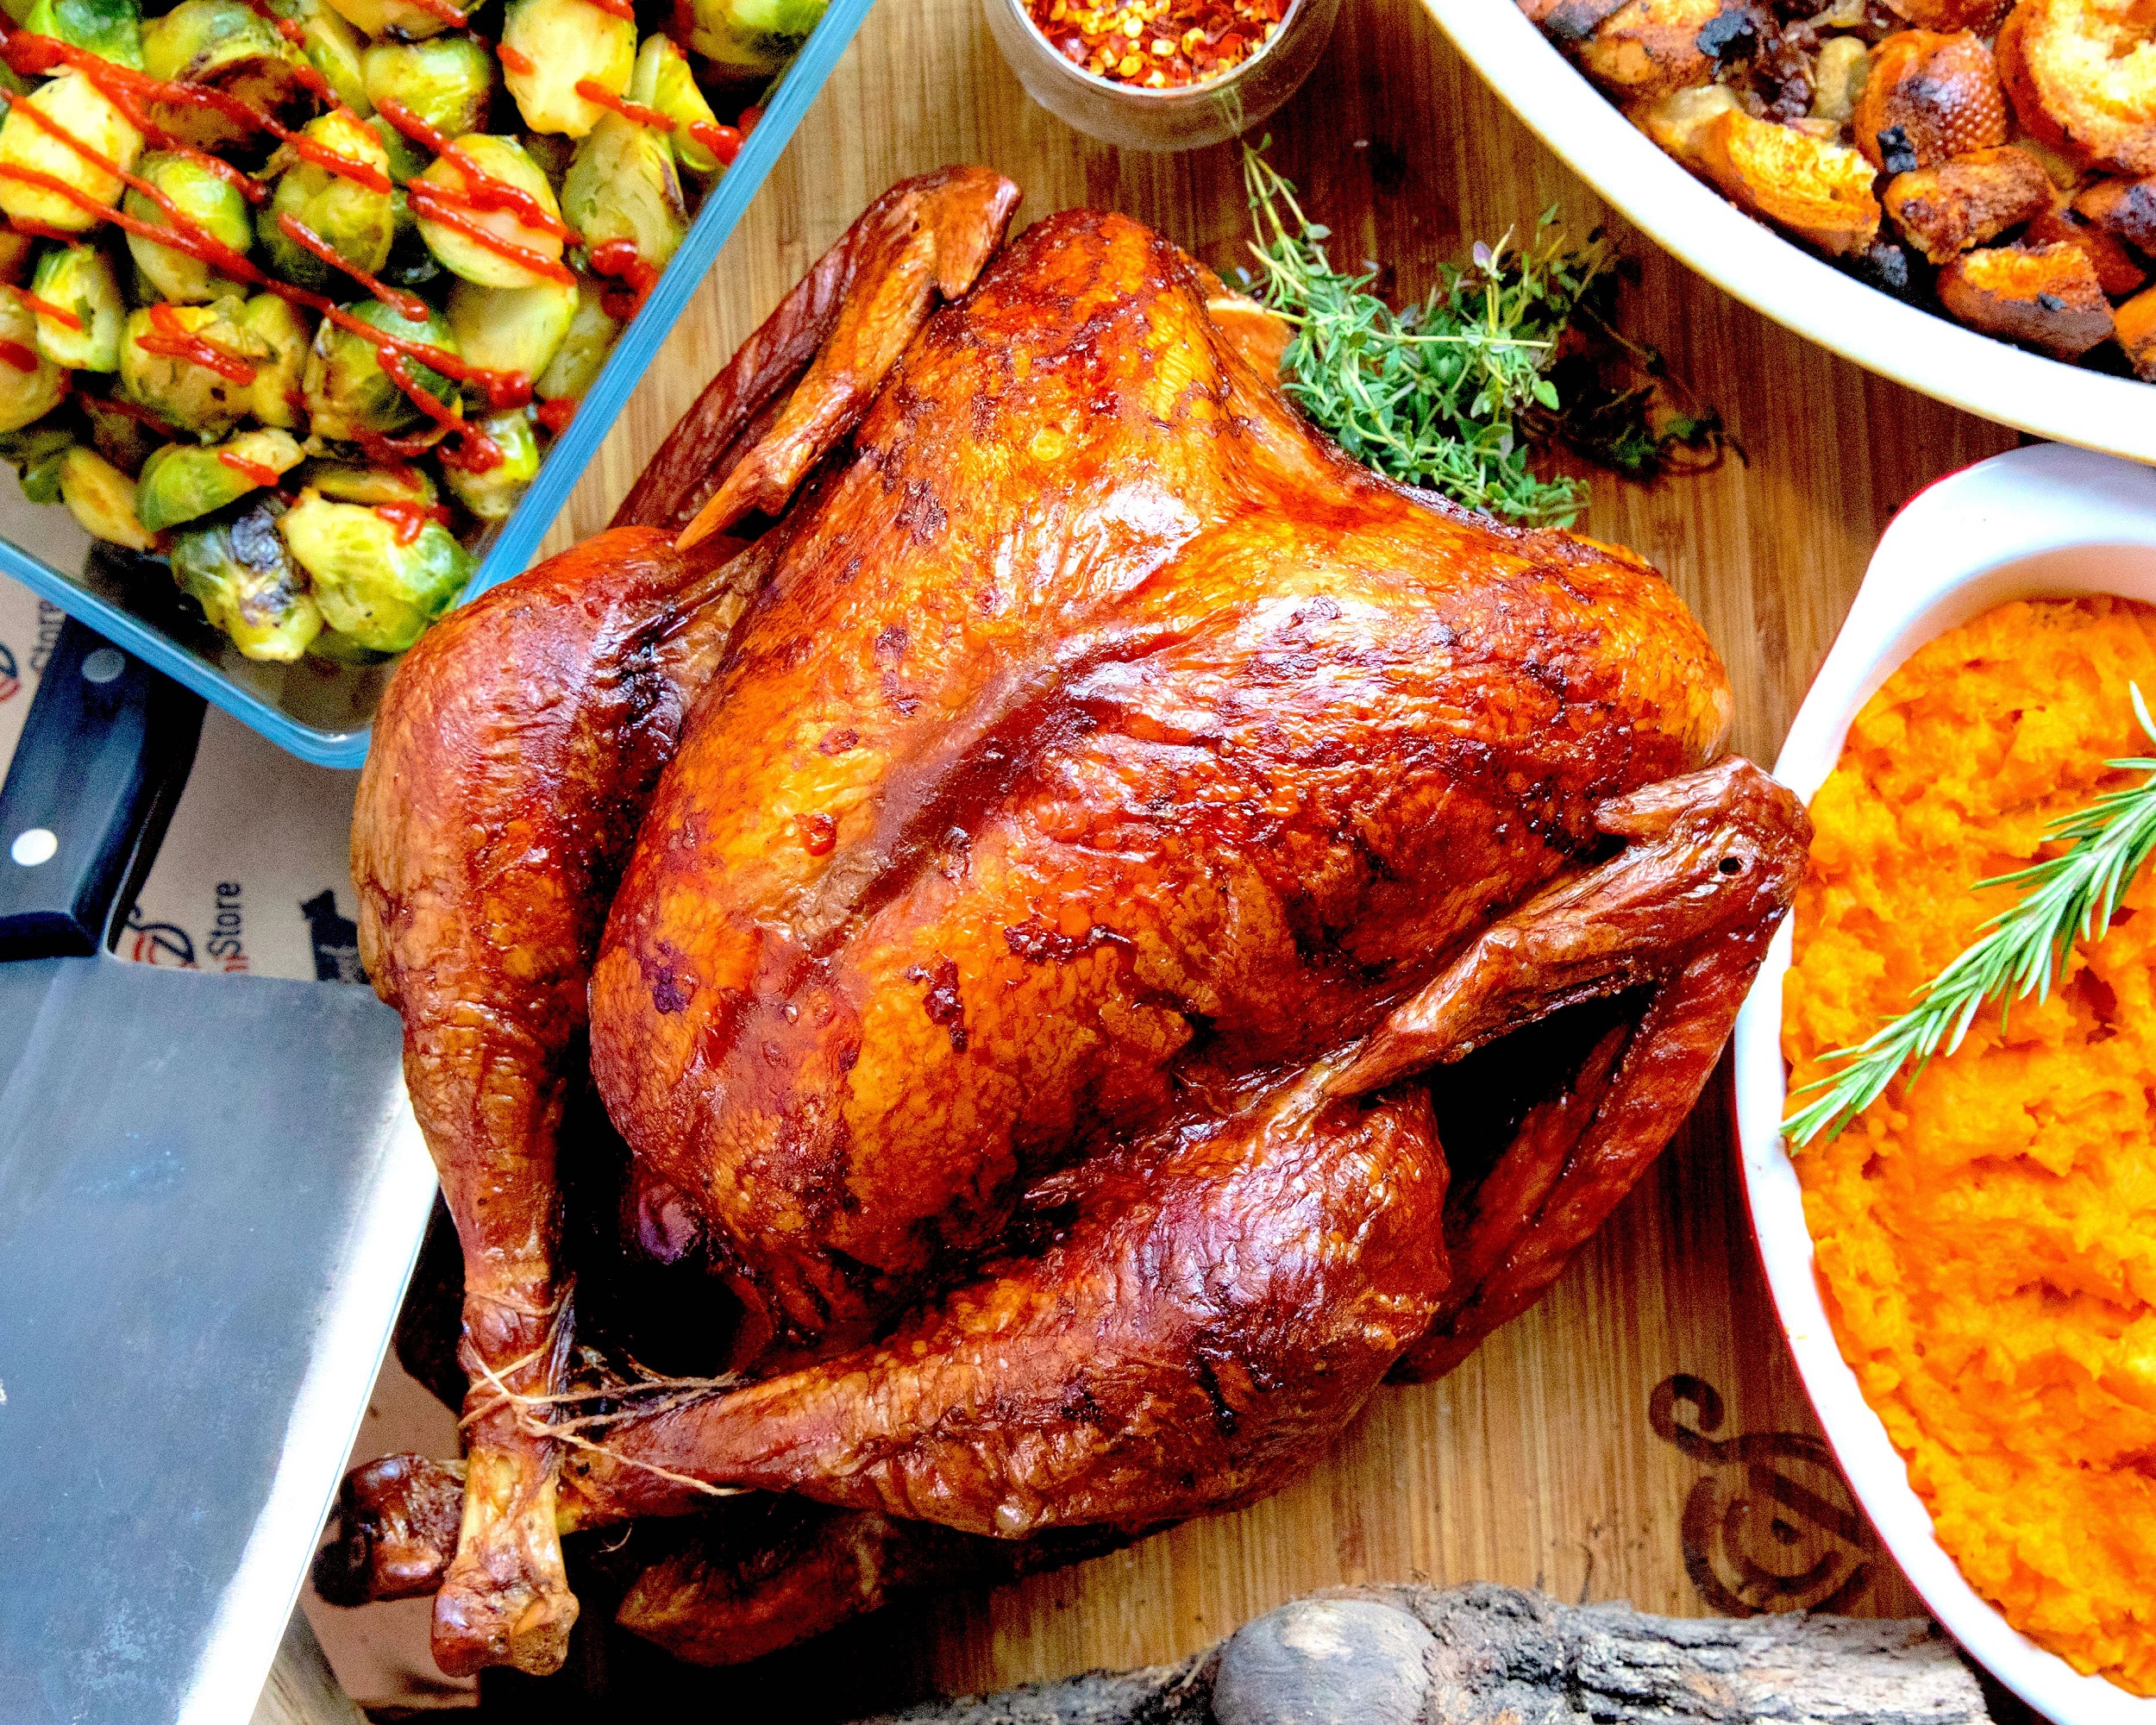 Where We’re Buying Our Festive Turkey in Dubai